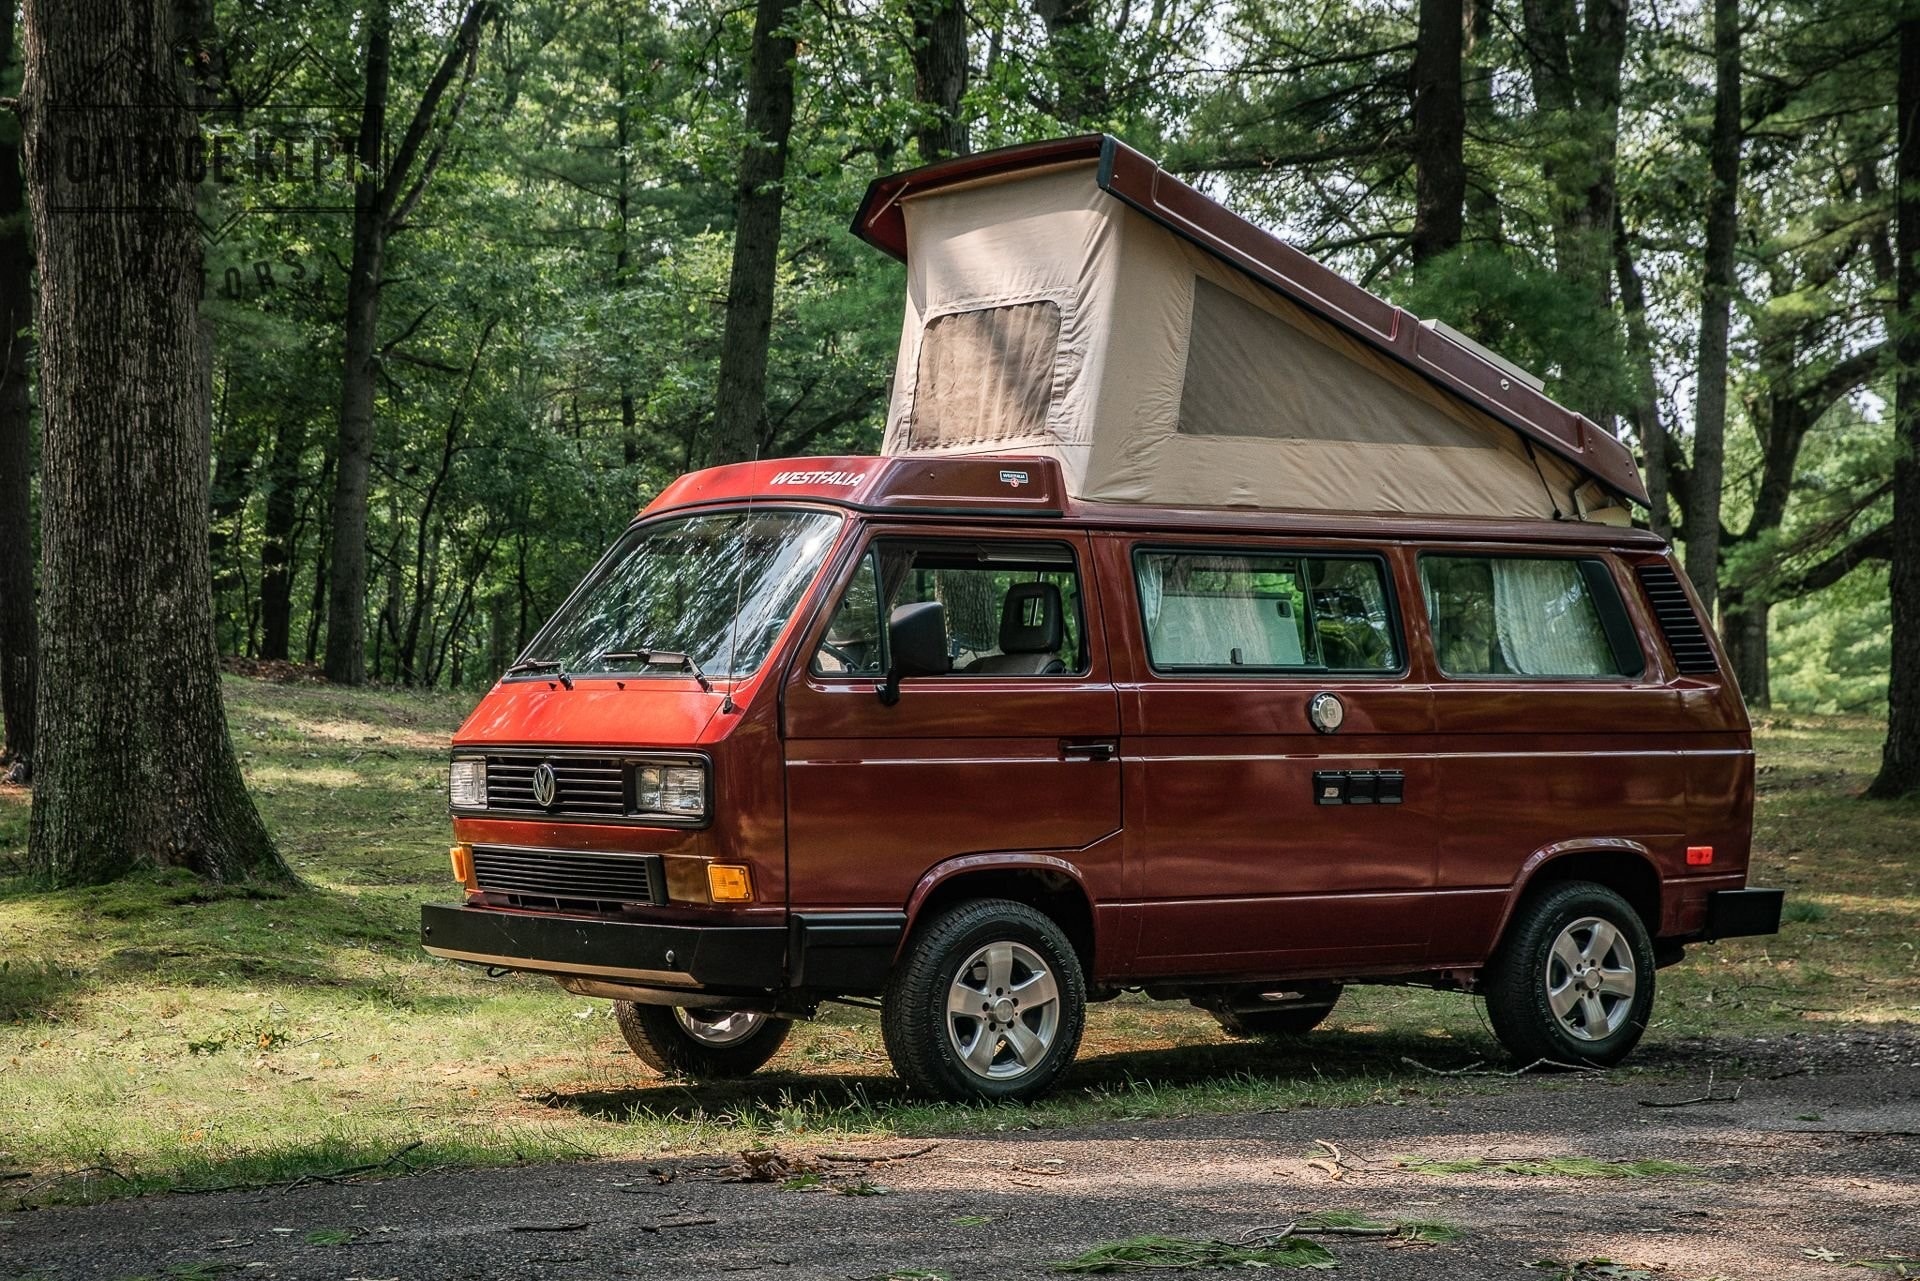 https://s1.cdn.autoevolution.com/images/news/titian-red-1989-vw-vanagon-westfalia-is-one-cool-summer-camper-also-very-pricey-167973_1.jpg